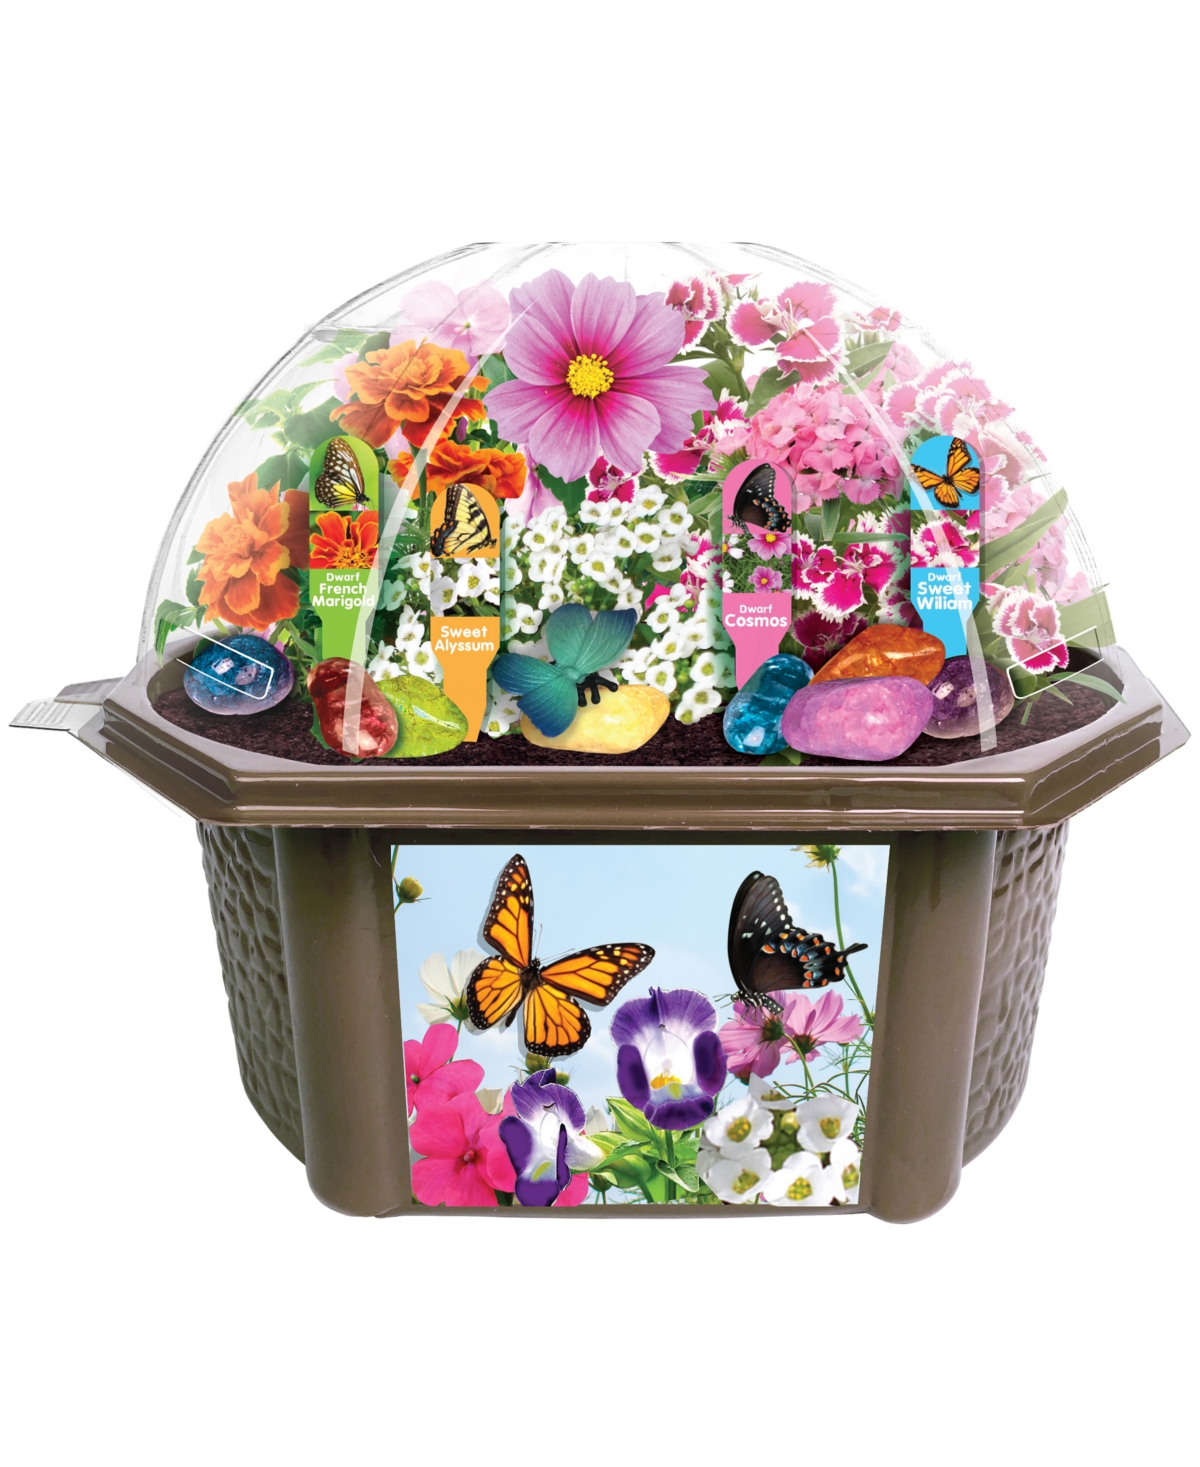 Areyougame Babies' Toys By Nature Biosphere Terrarium Bountiful Butterfly Garden Plant Kit In No Color